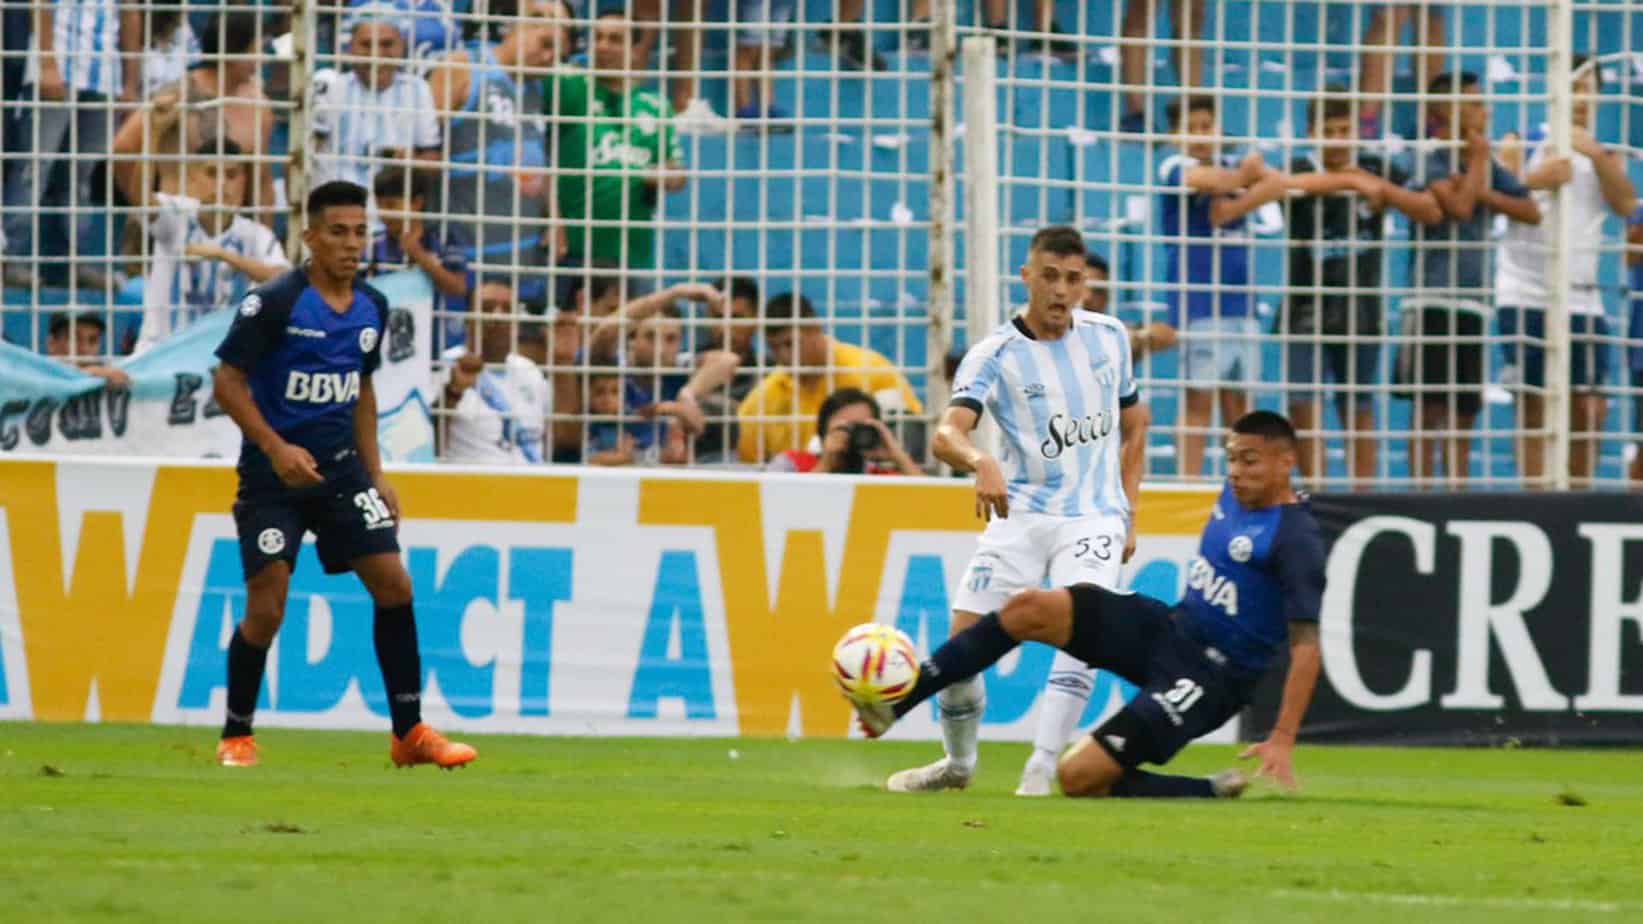 Talleres vs. Atlético Tucumán – Betting Odds and Free Pick